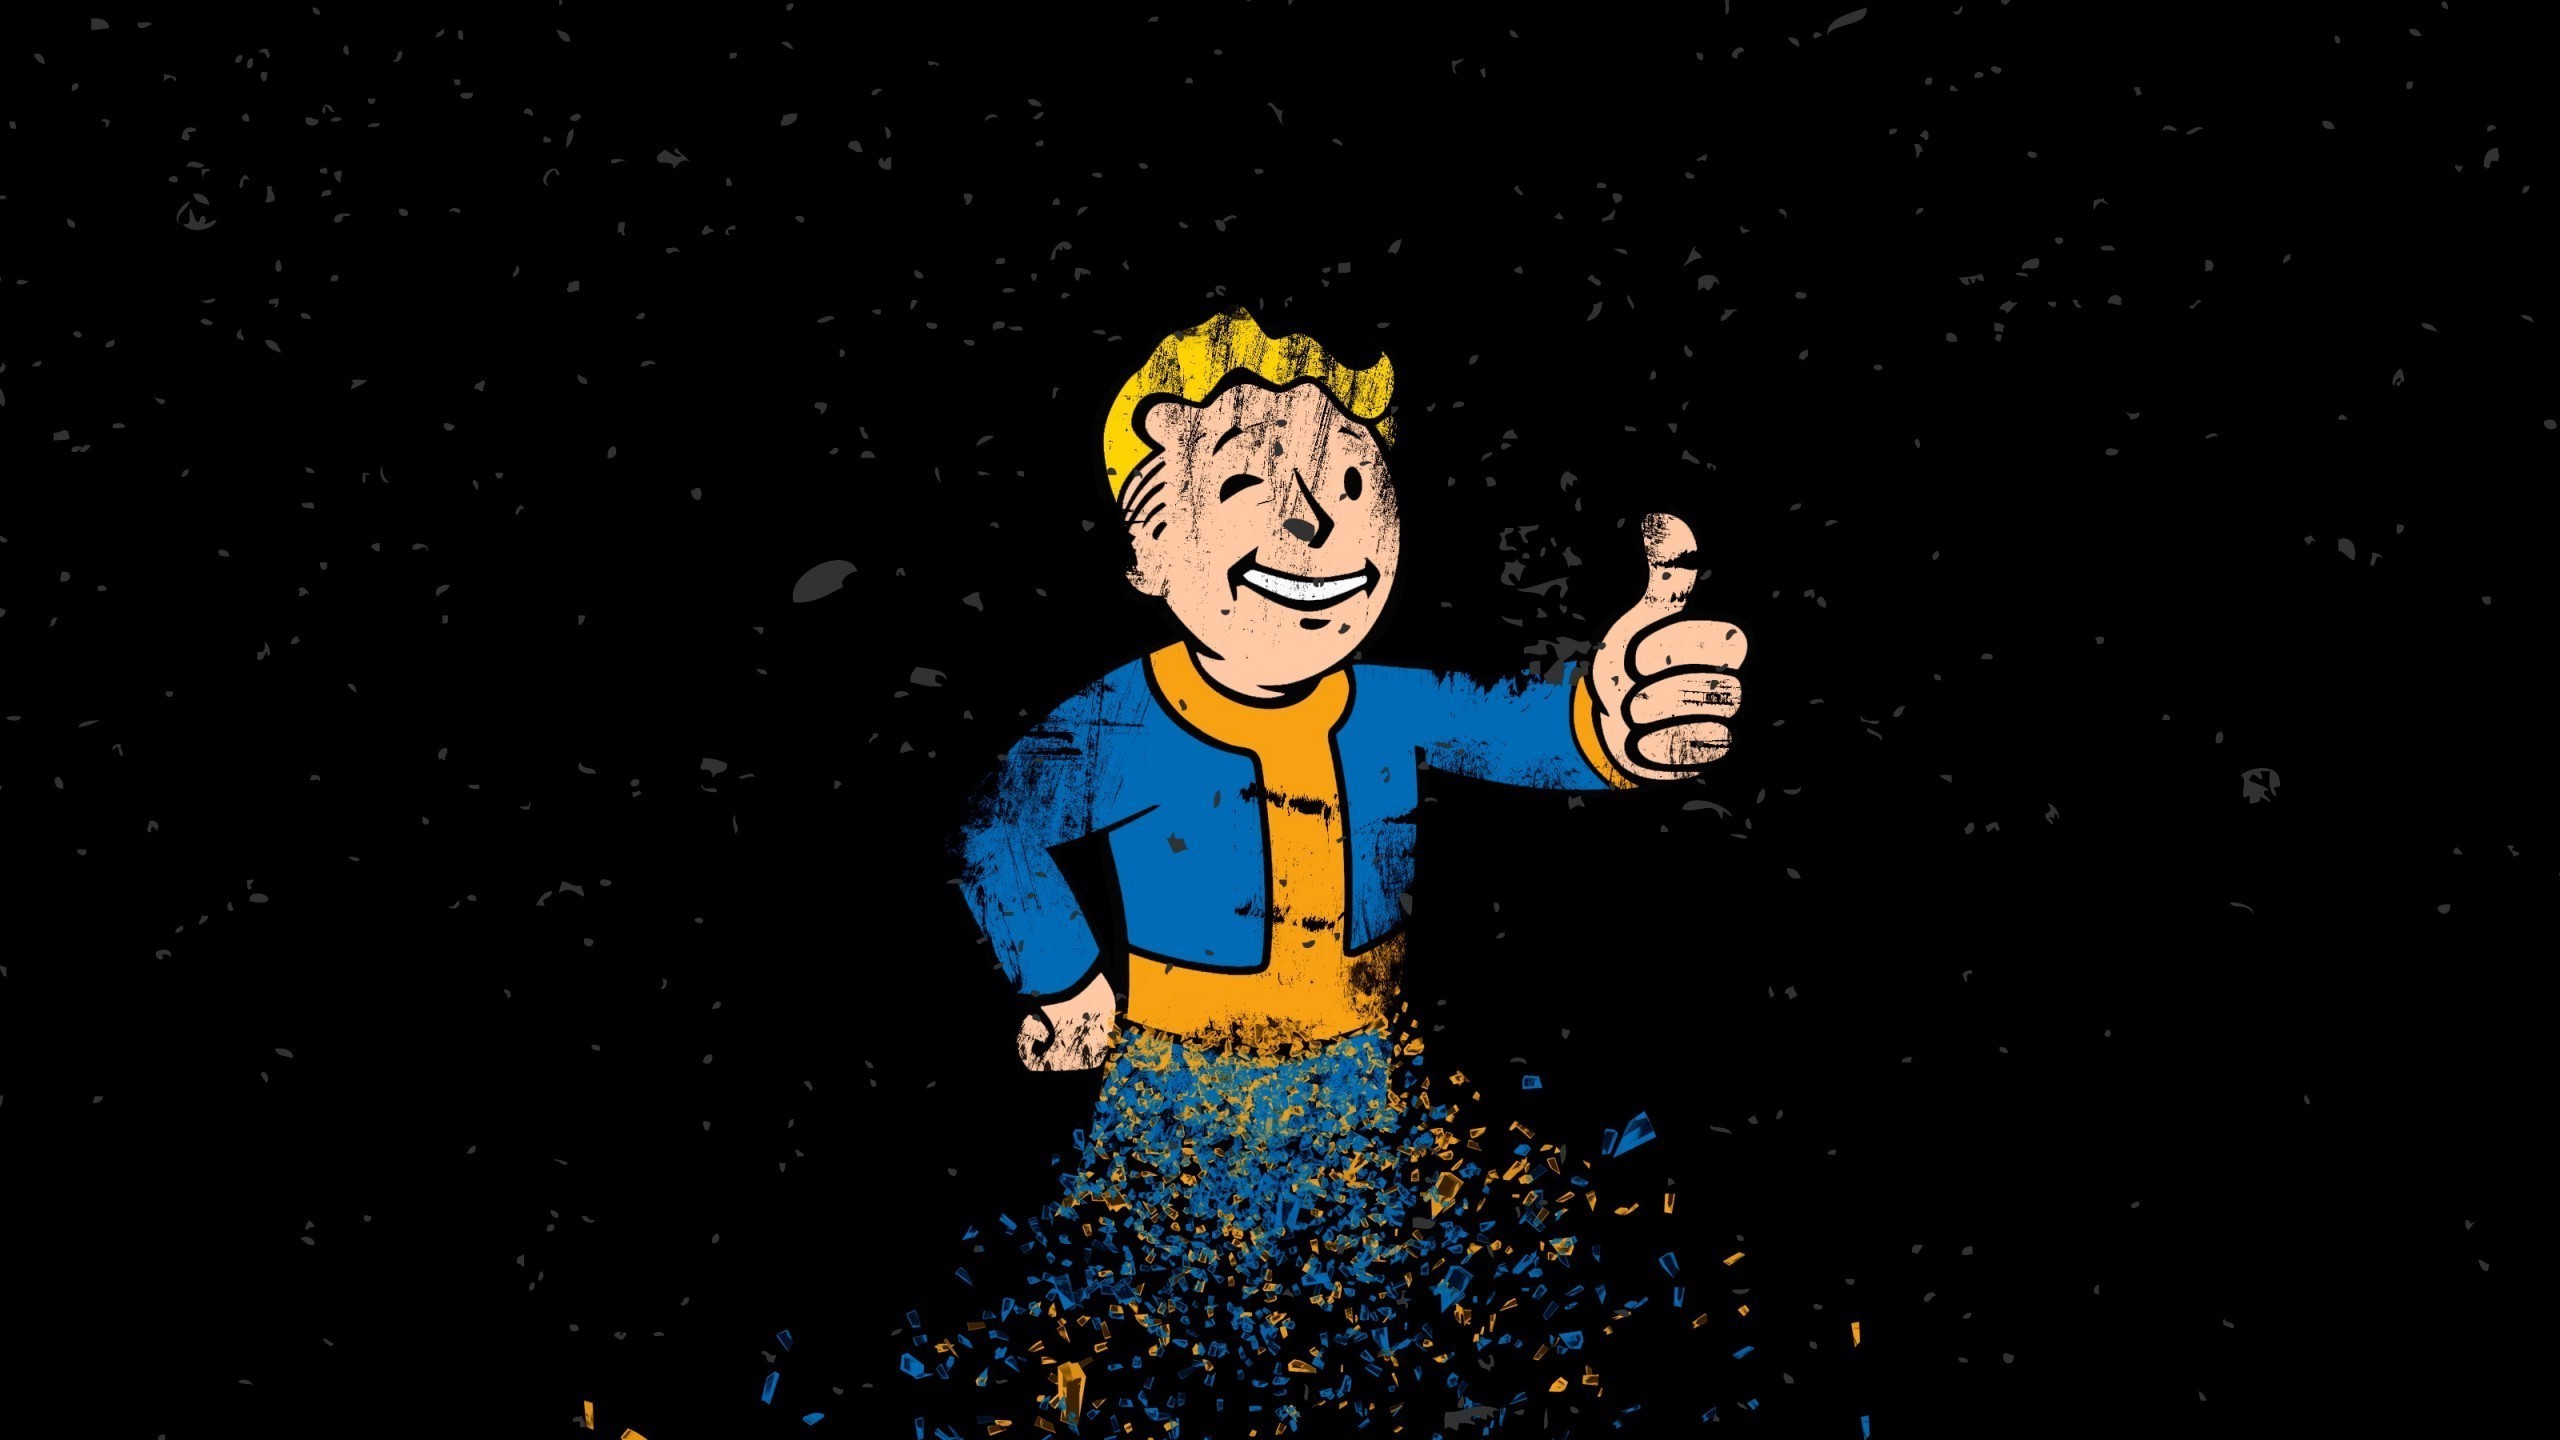 2560x1440 Fallout Vault Boy Wallpaper Pictures to Pin on Pinterest - PinsDaddy